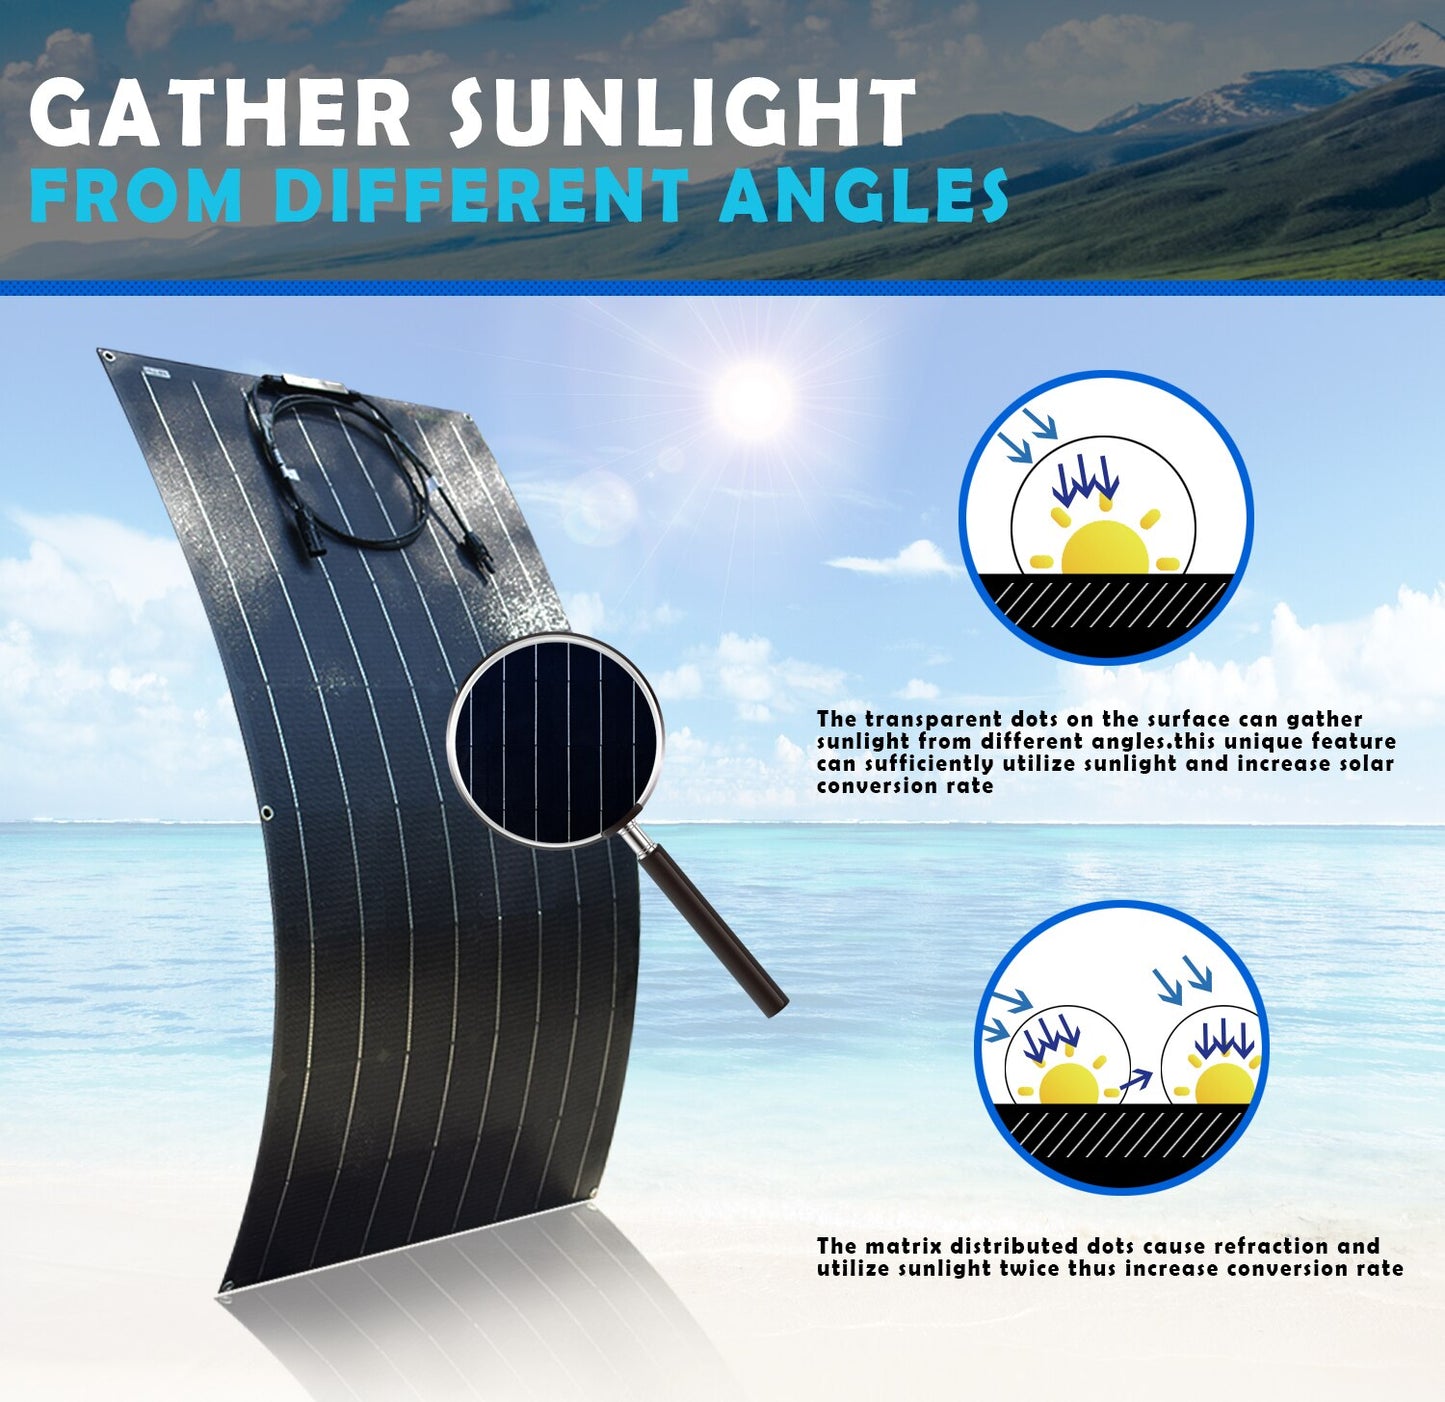 GATHER SUNLIGHT FROM DIFFERENT ANGLES